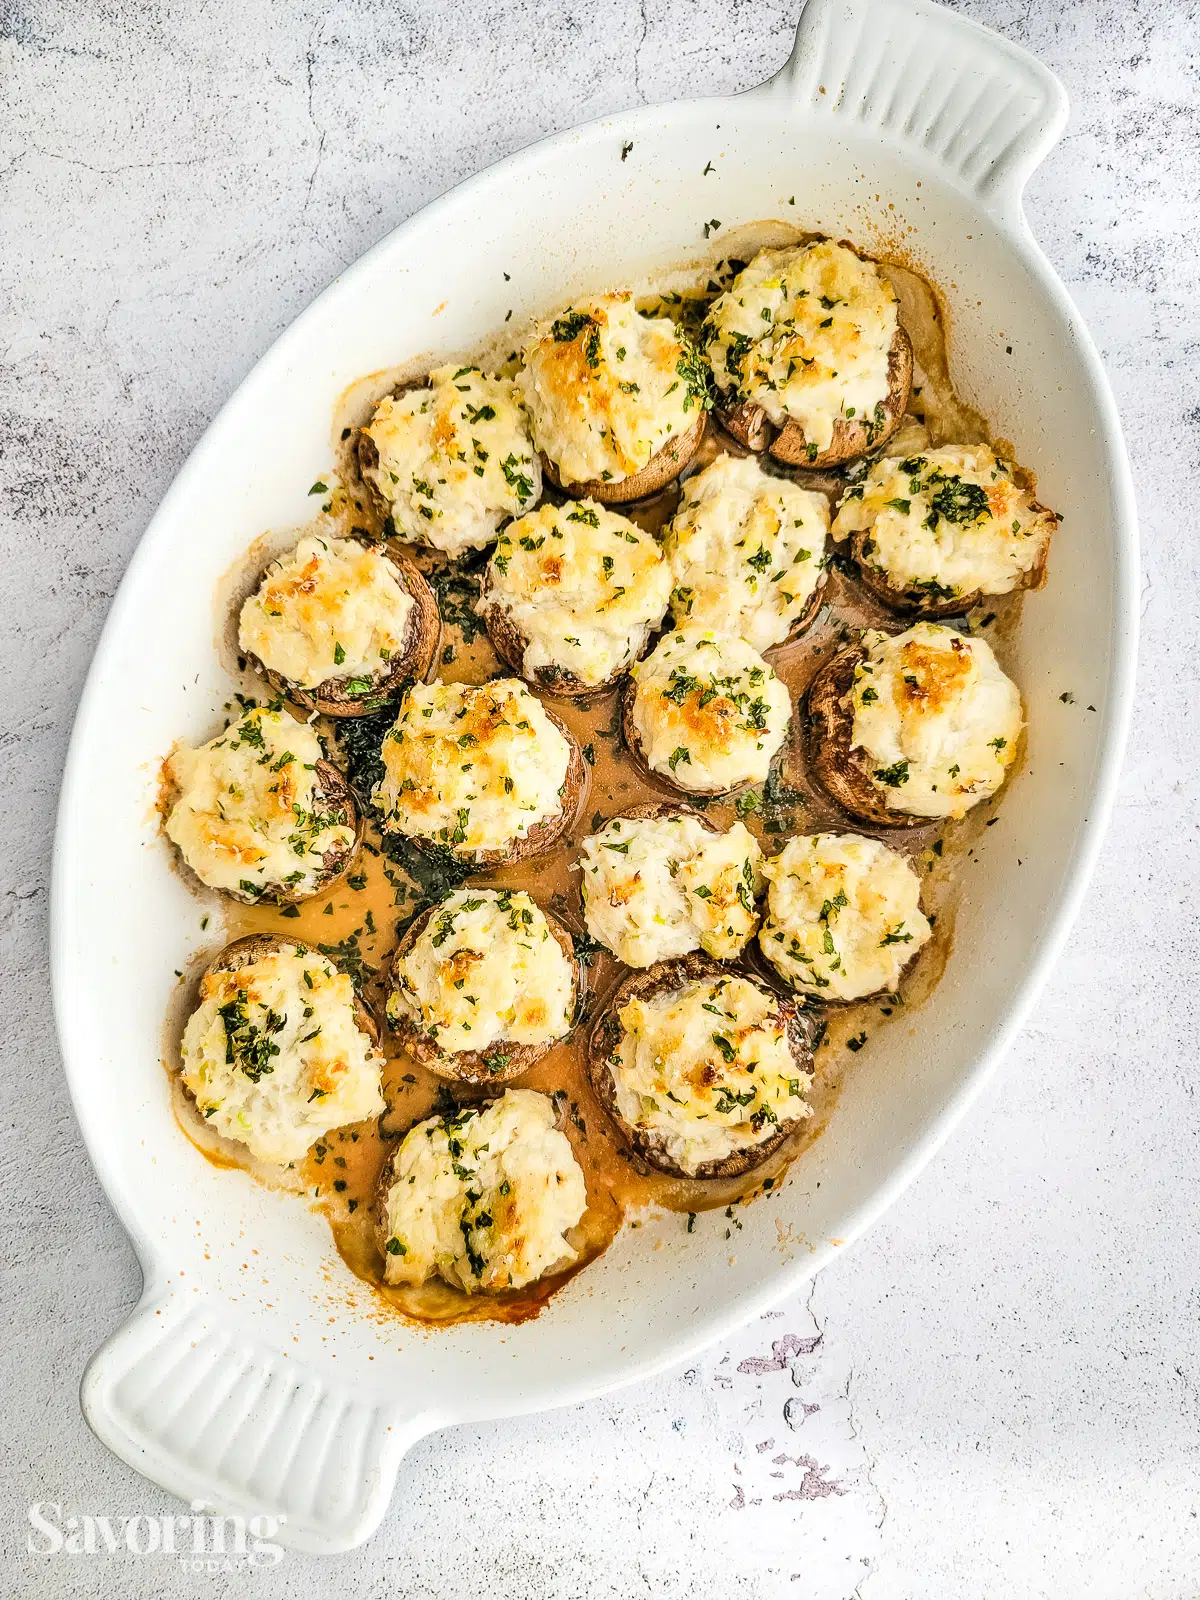 Mushrooms stuffed with crab fresh from the oven in a white dish